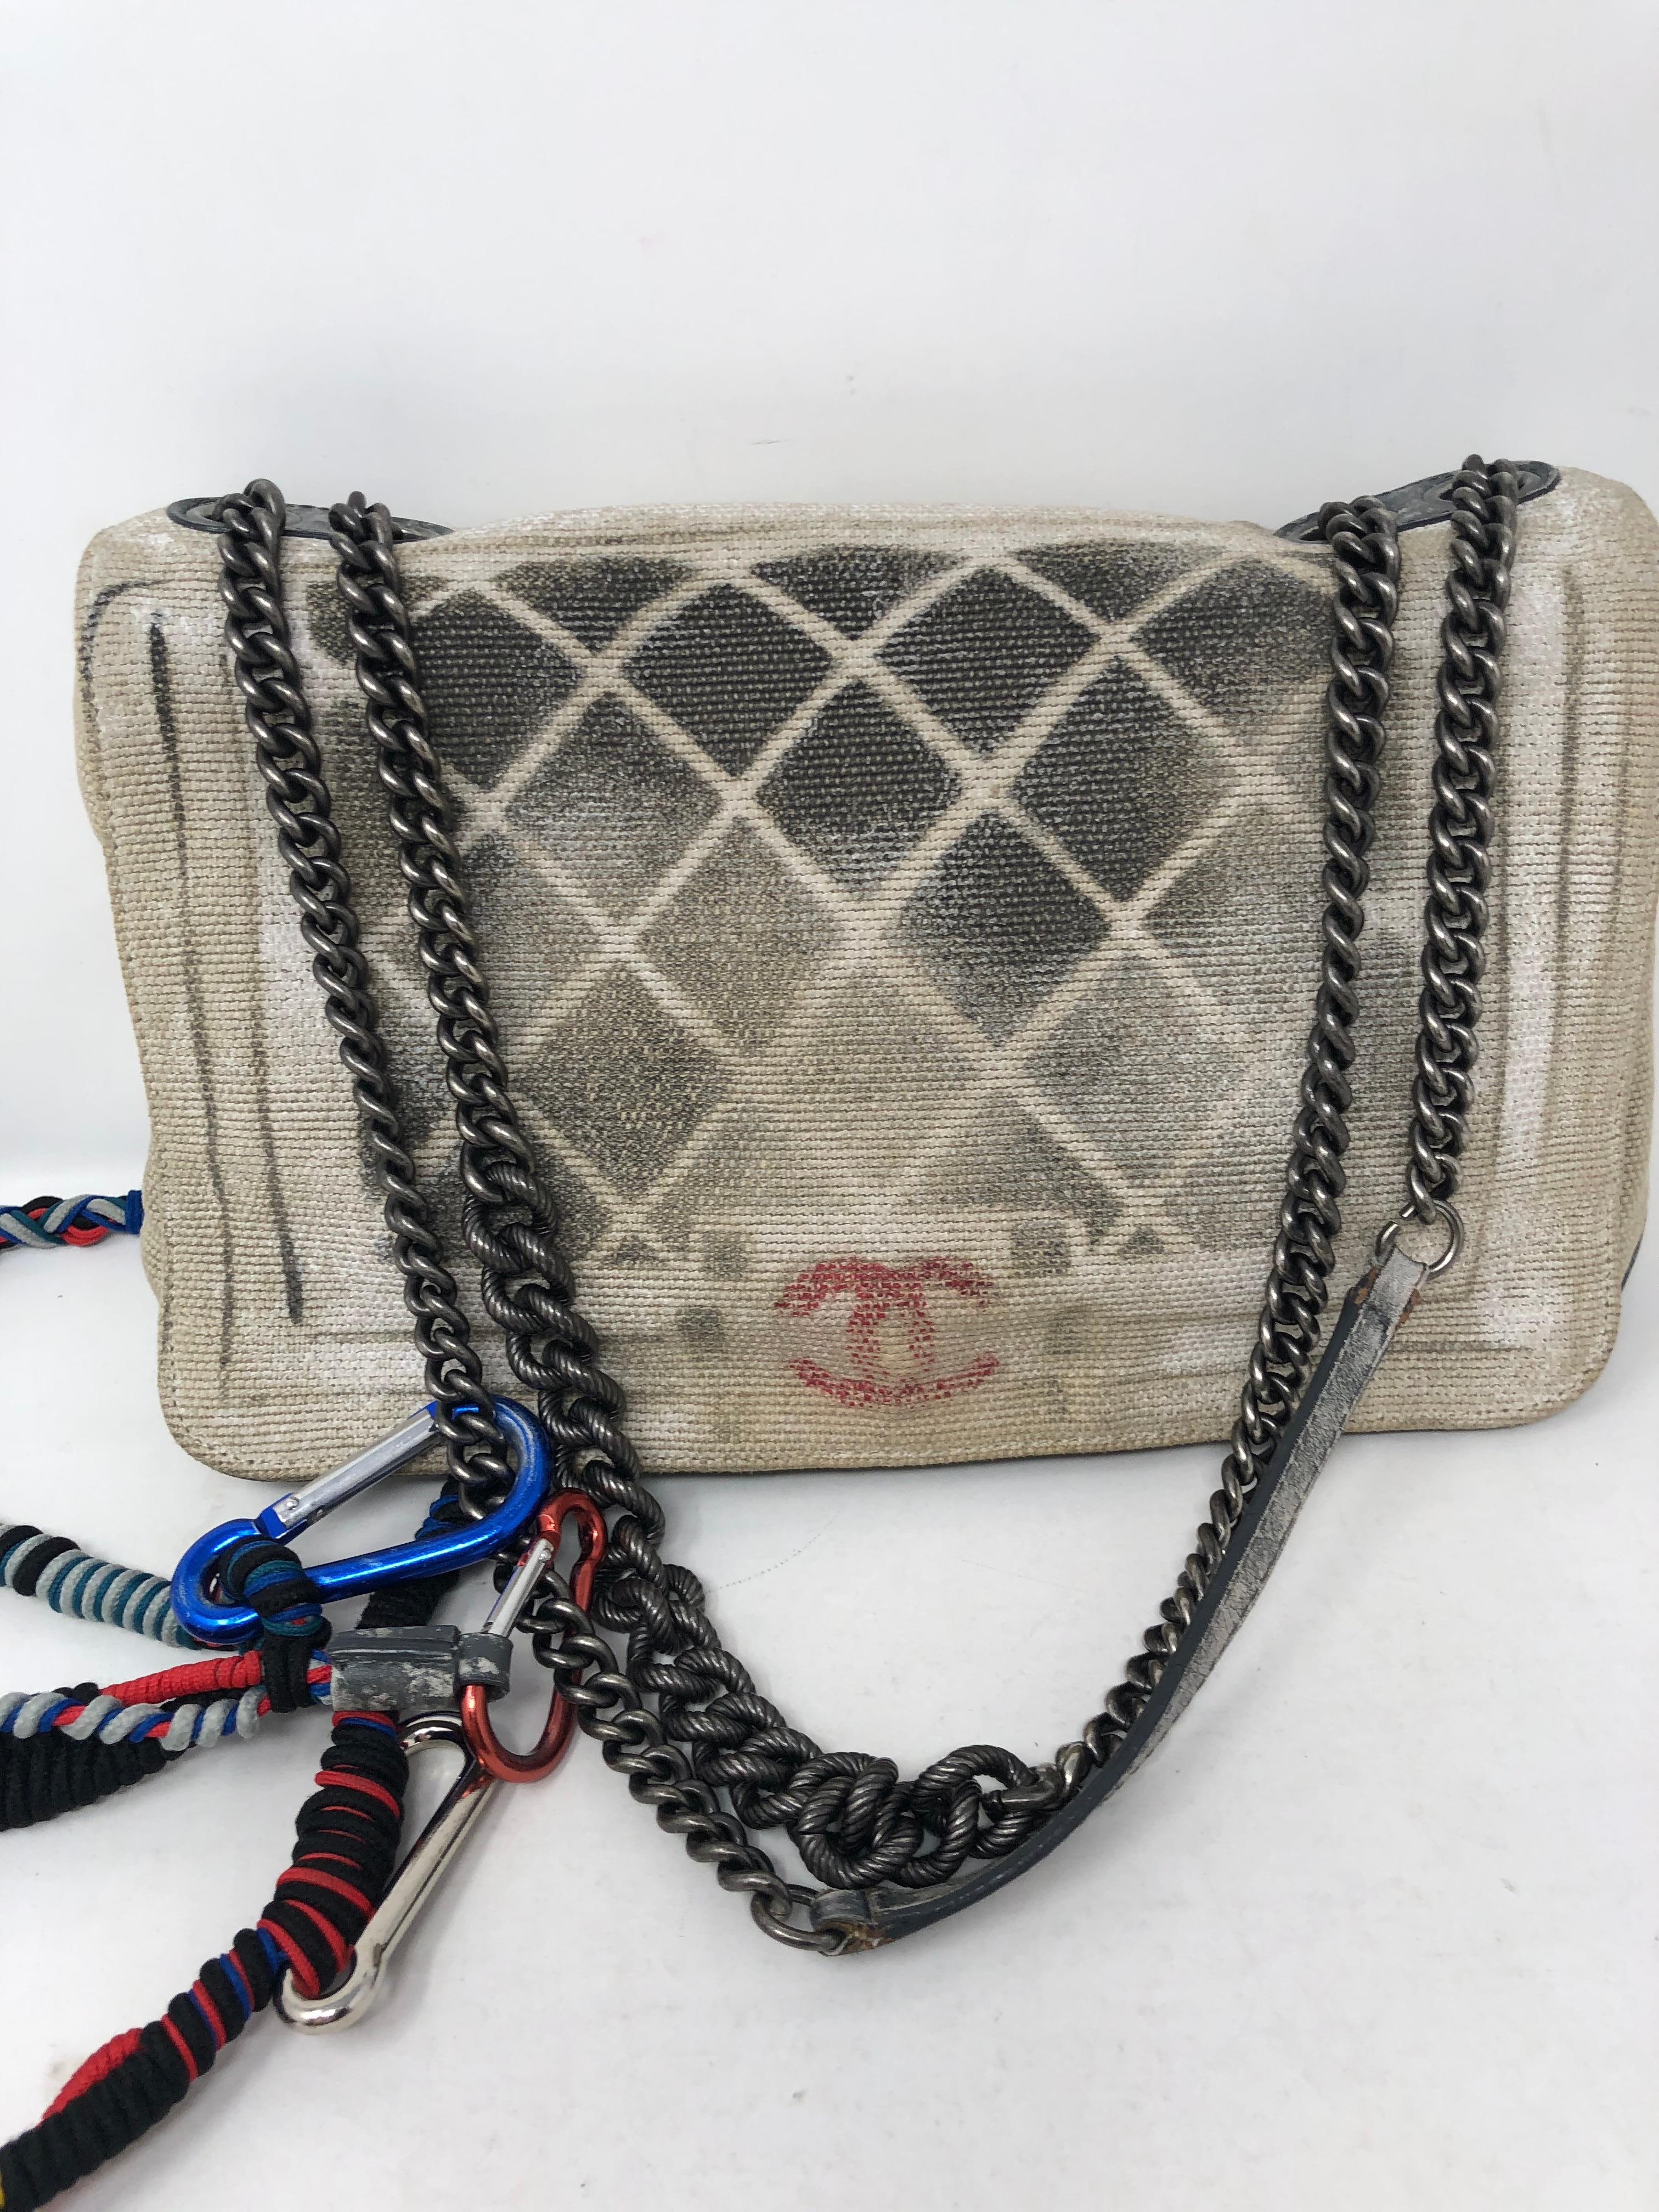 Chanel Graffiti Crossbody Bag. Runway and rare Chanel Canvas Bag with chain shoulder straps. And nylon multicolor strap. Can be worn as a crossbody or a shoulder bag.